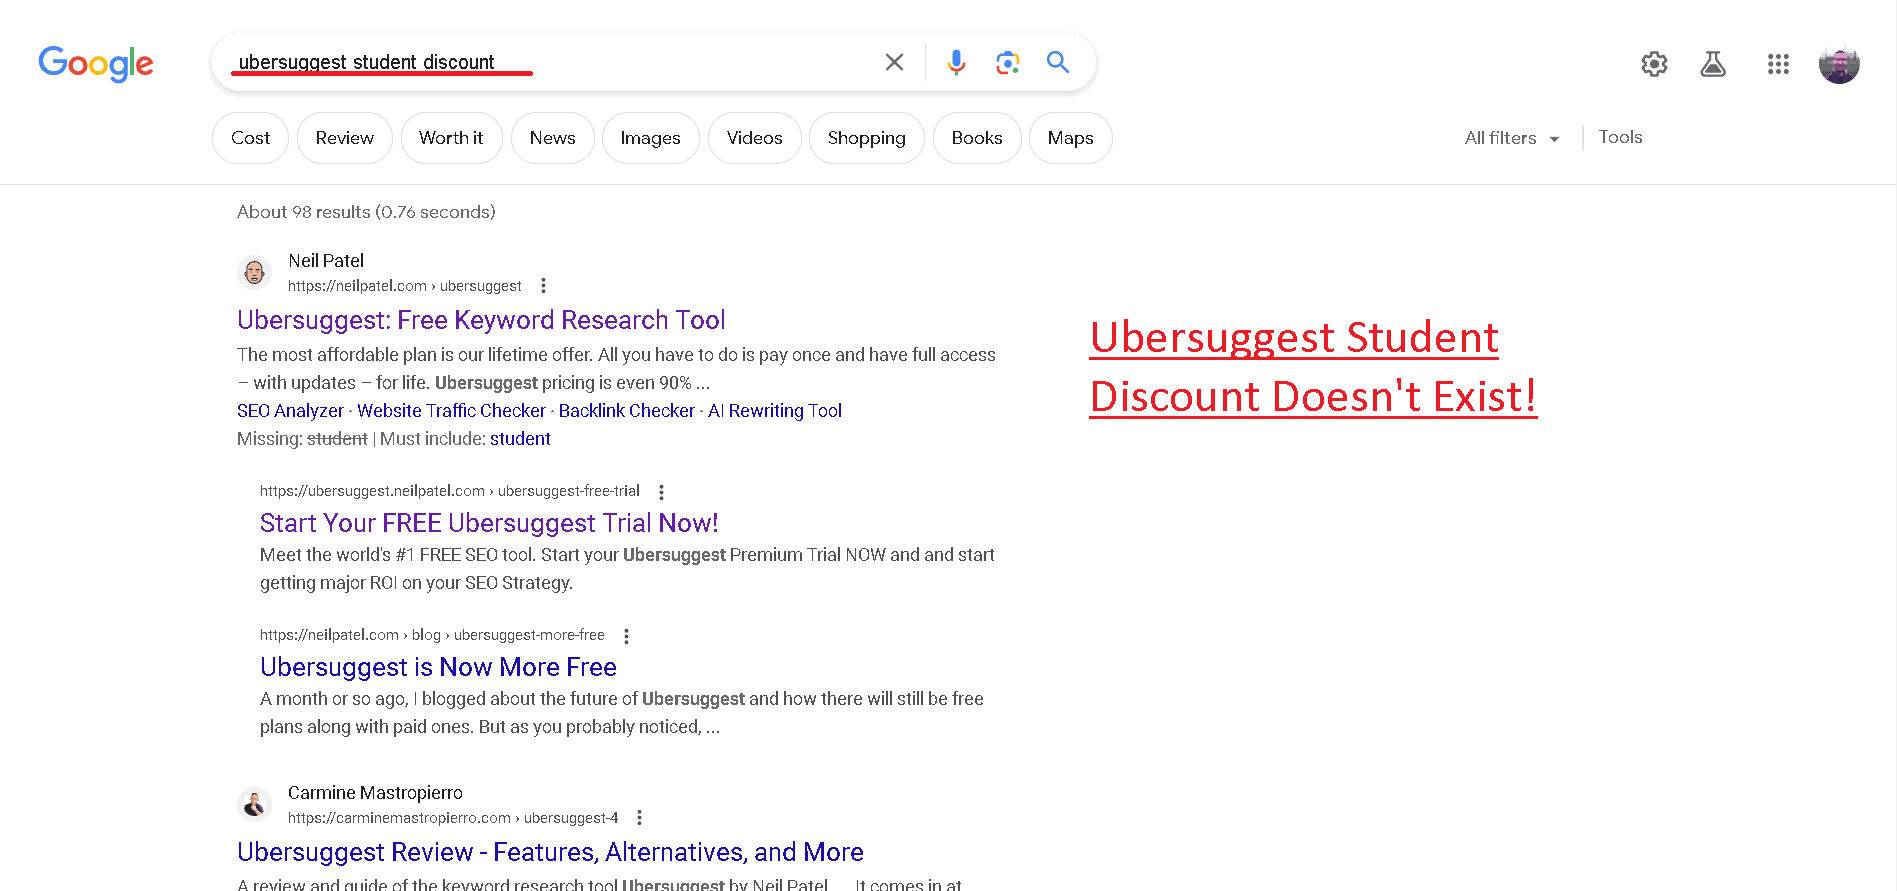 Ubersuggest student discount doesn't exist